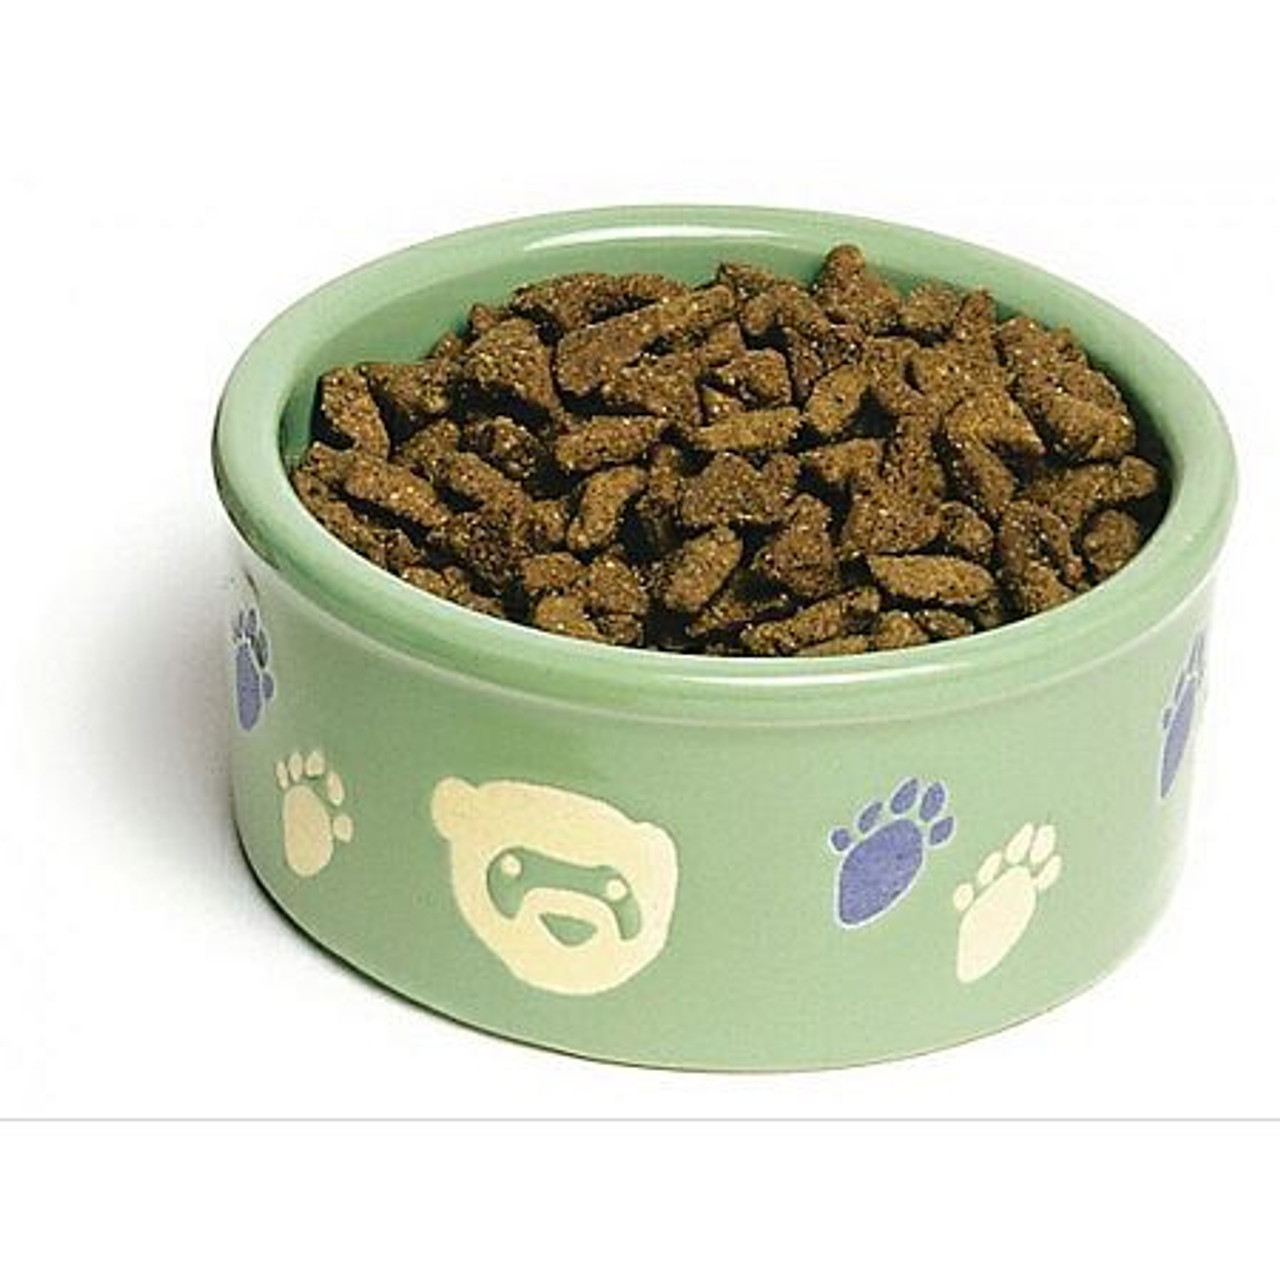 Ceramic Dog Bowl, Grass Green, Food and Water Bowl for Pets, Colorful Cat  Dish